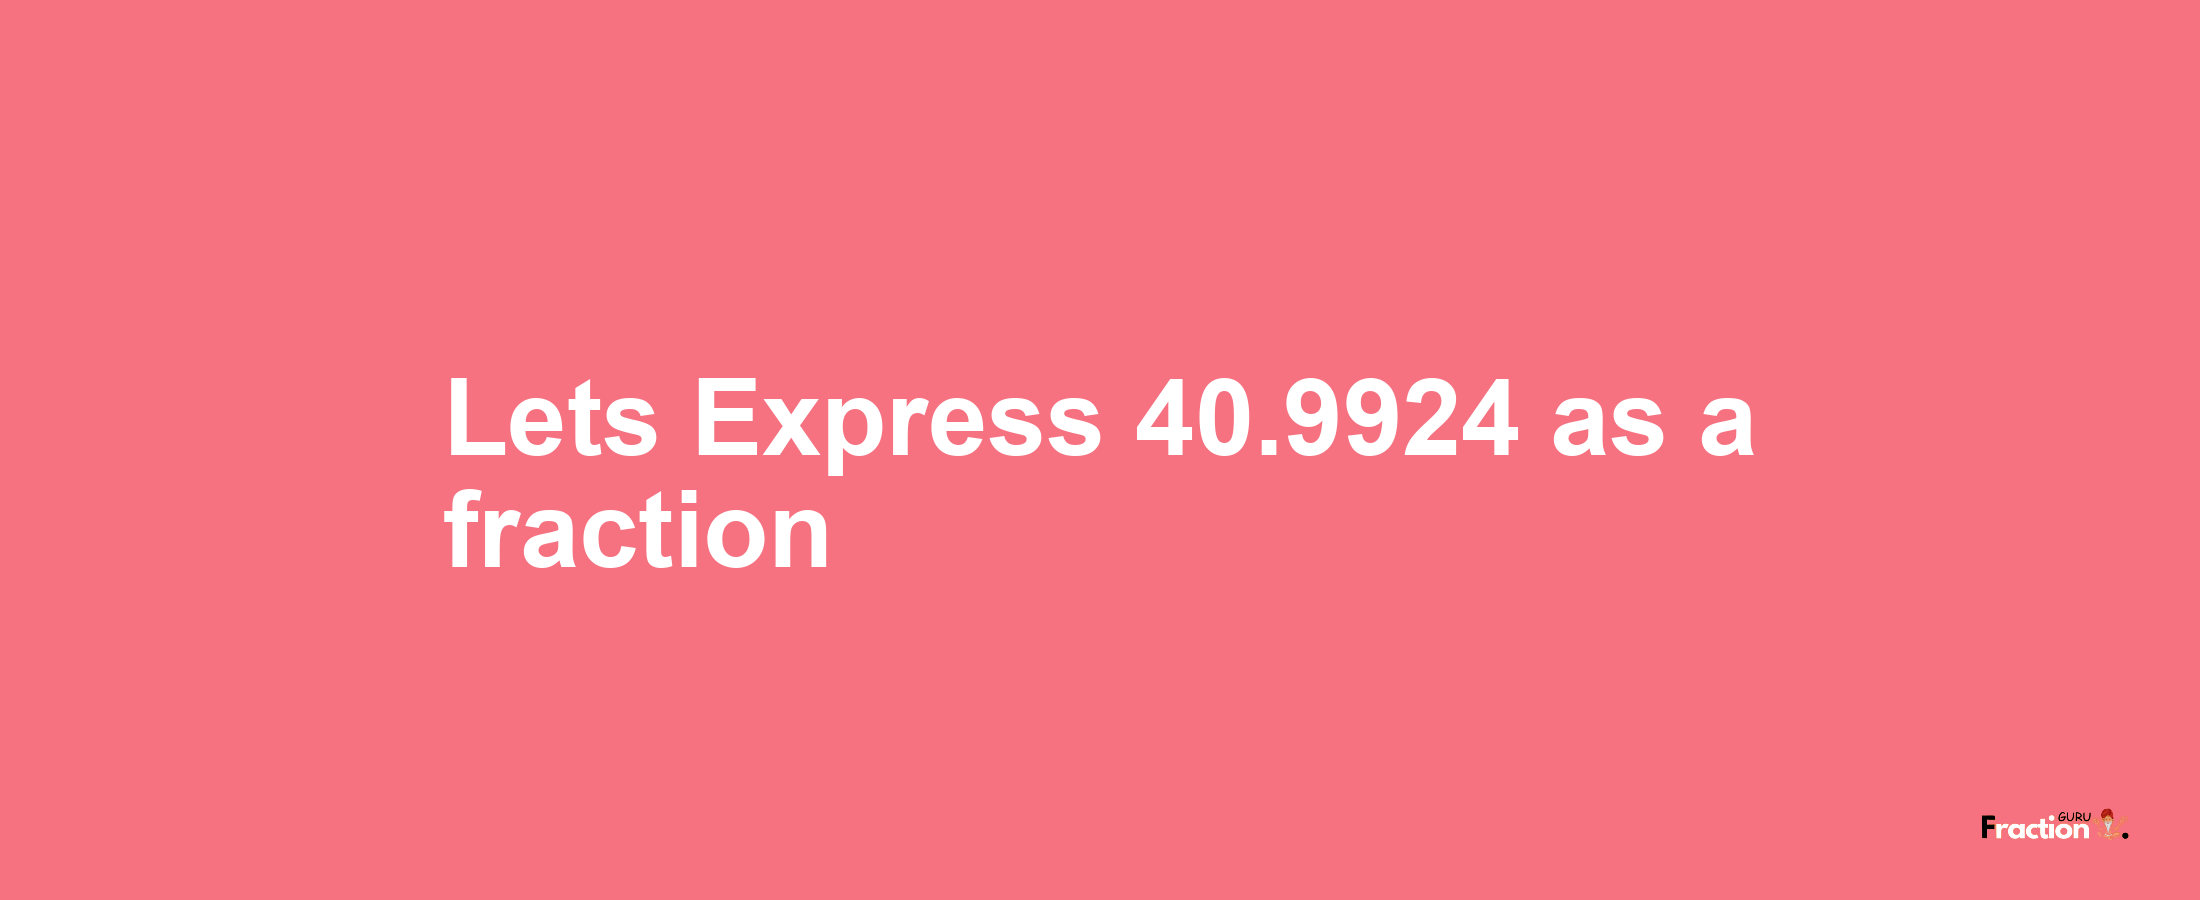 Lets Express 40.9924 as afraction